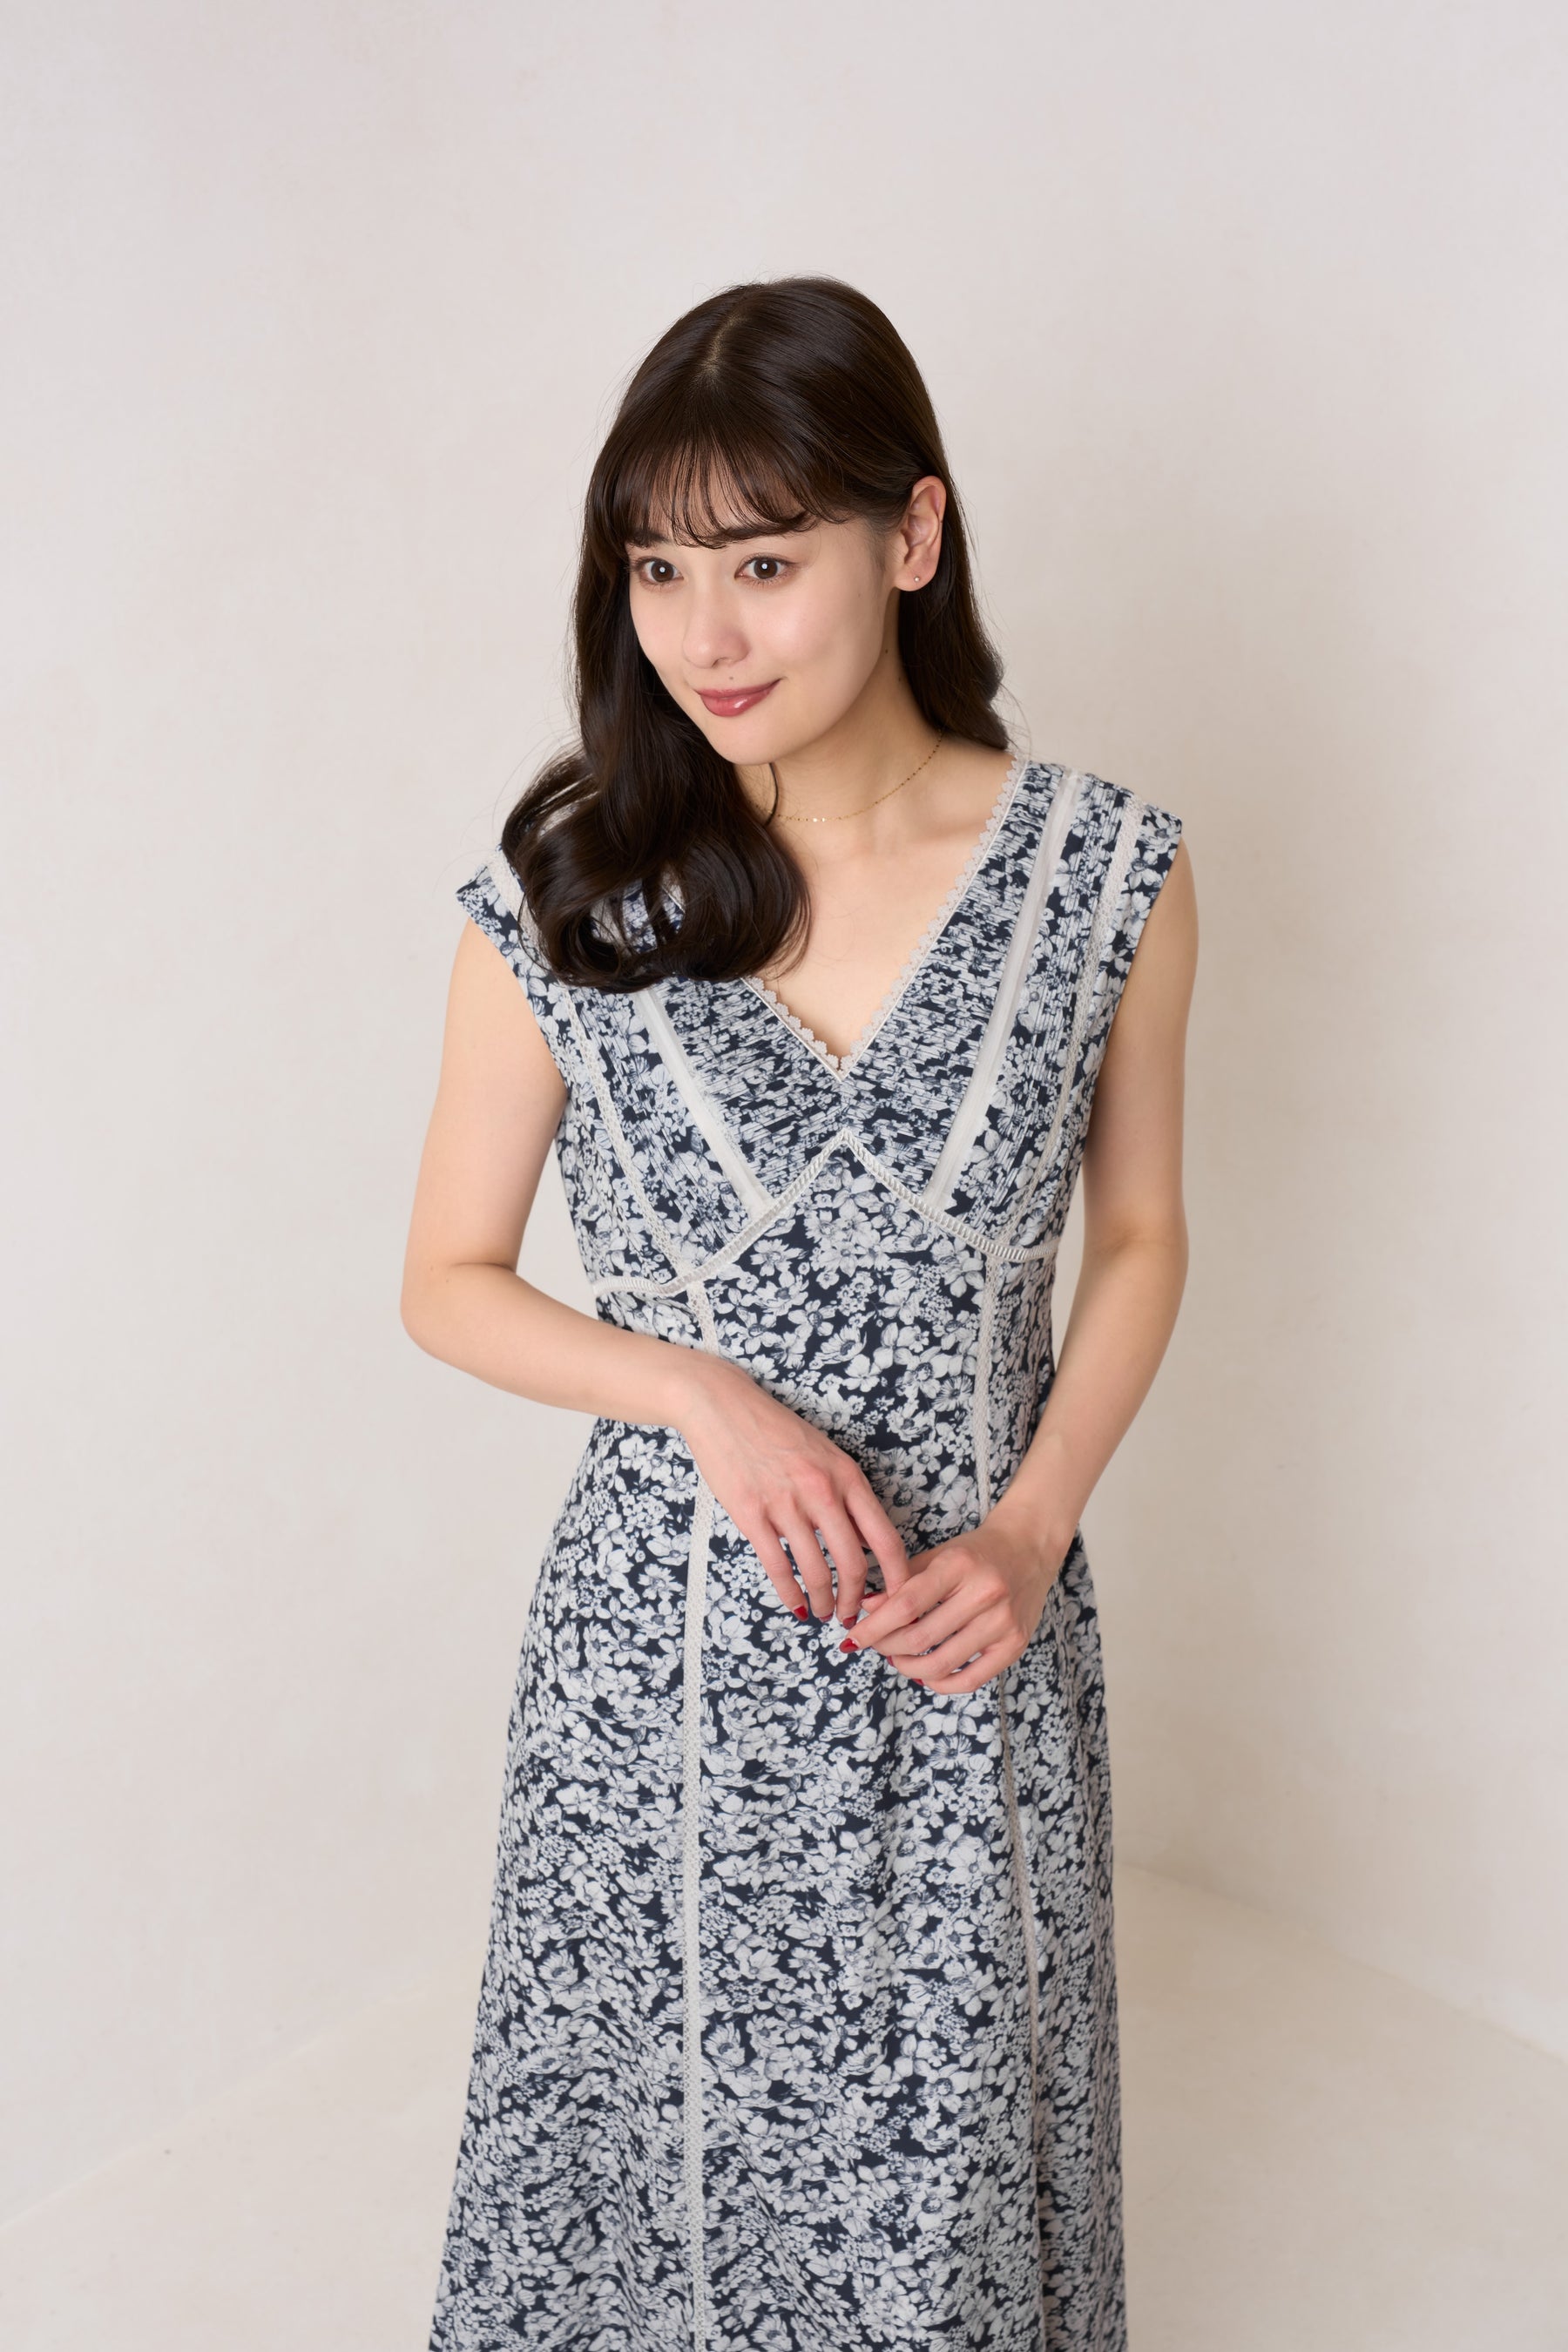 herlipto Lace Trimmed Floral Dress ネイビー1度のみ着用です